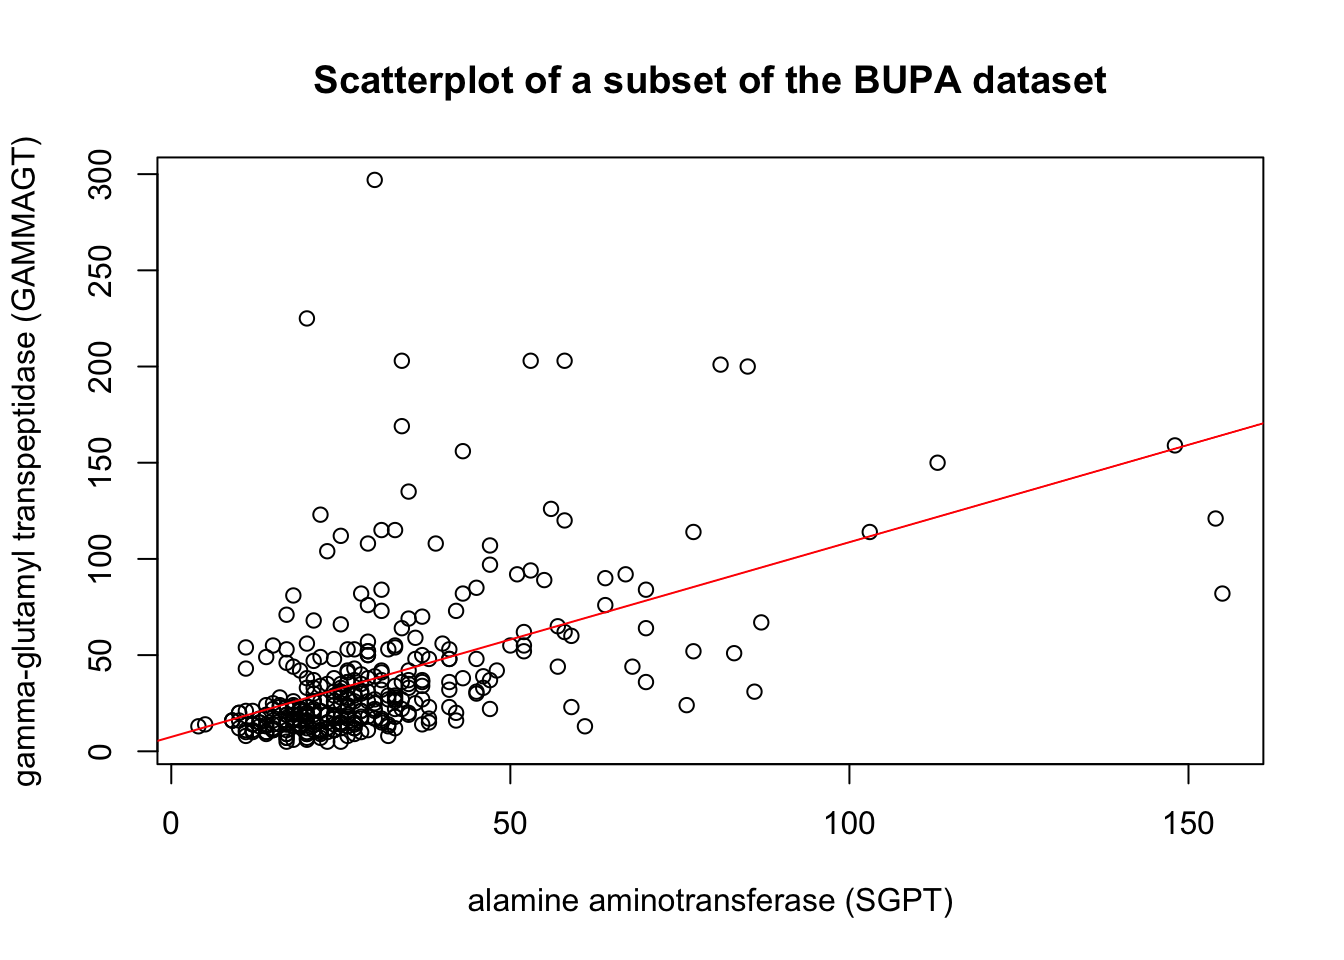 Linear fit and Box-Cox transformation in the BUPA dataset.